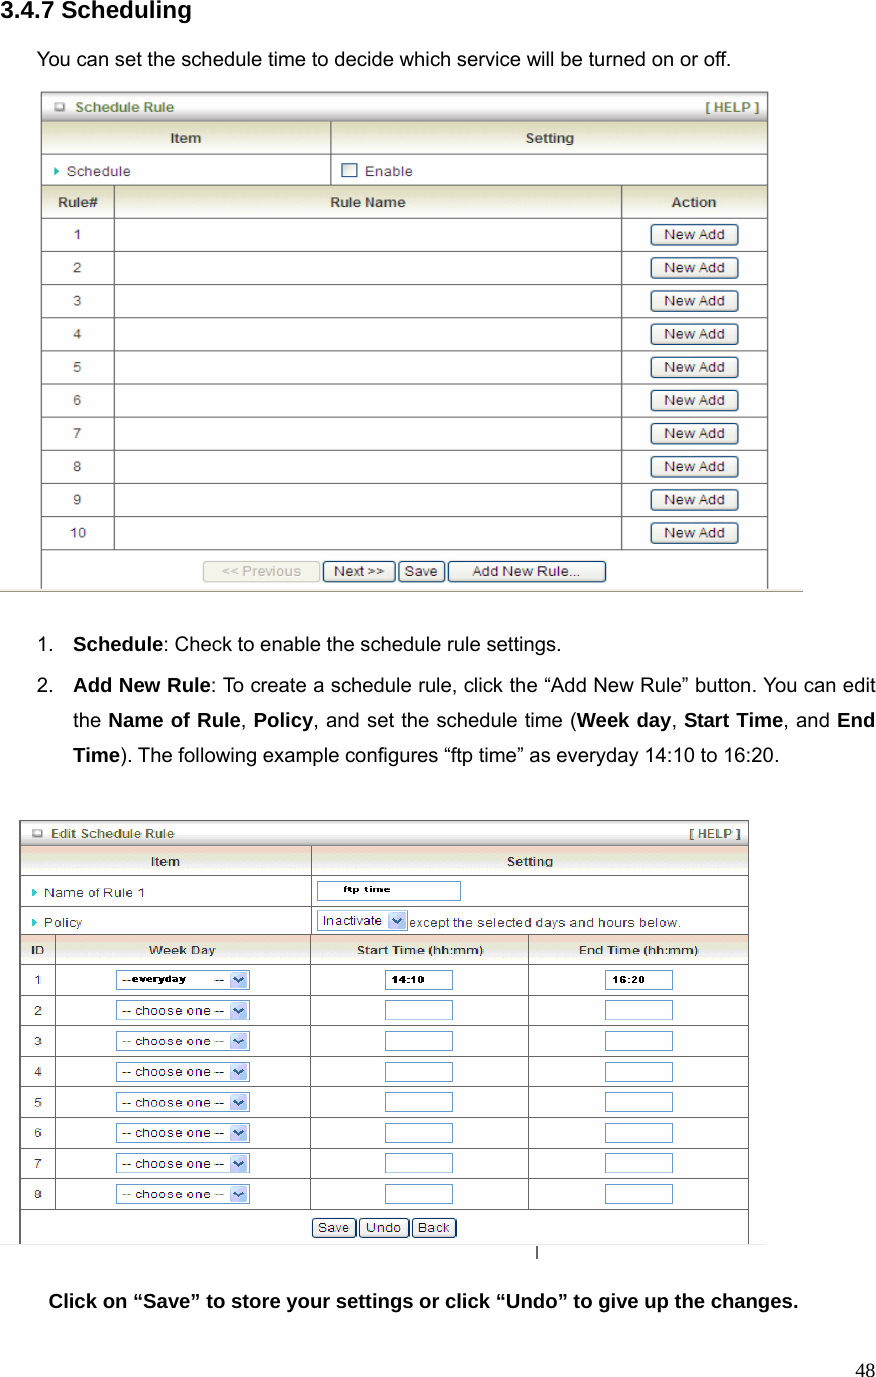  483.4.7 Scheduling  You can set the schedule time to decide which service will be turned on or off.     1.  Schedule: Check to enable the schedule rule settings.   2.  Add New Rule: To create a schedule rule, click the “Add New Rule” button. You can edit the Name of Rule, Policy, and set the schedule time (Week day, Start Time, and End Time). The following example configures “ftp time” as everyday 14:10 to 16:20.    Click on “Save” to store your settings or click “Undo” to give up the changes. 